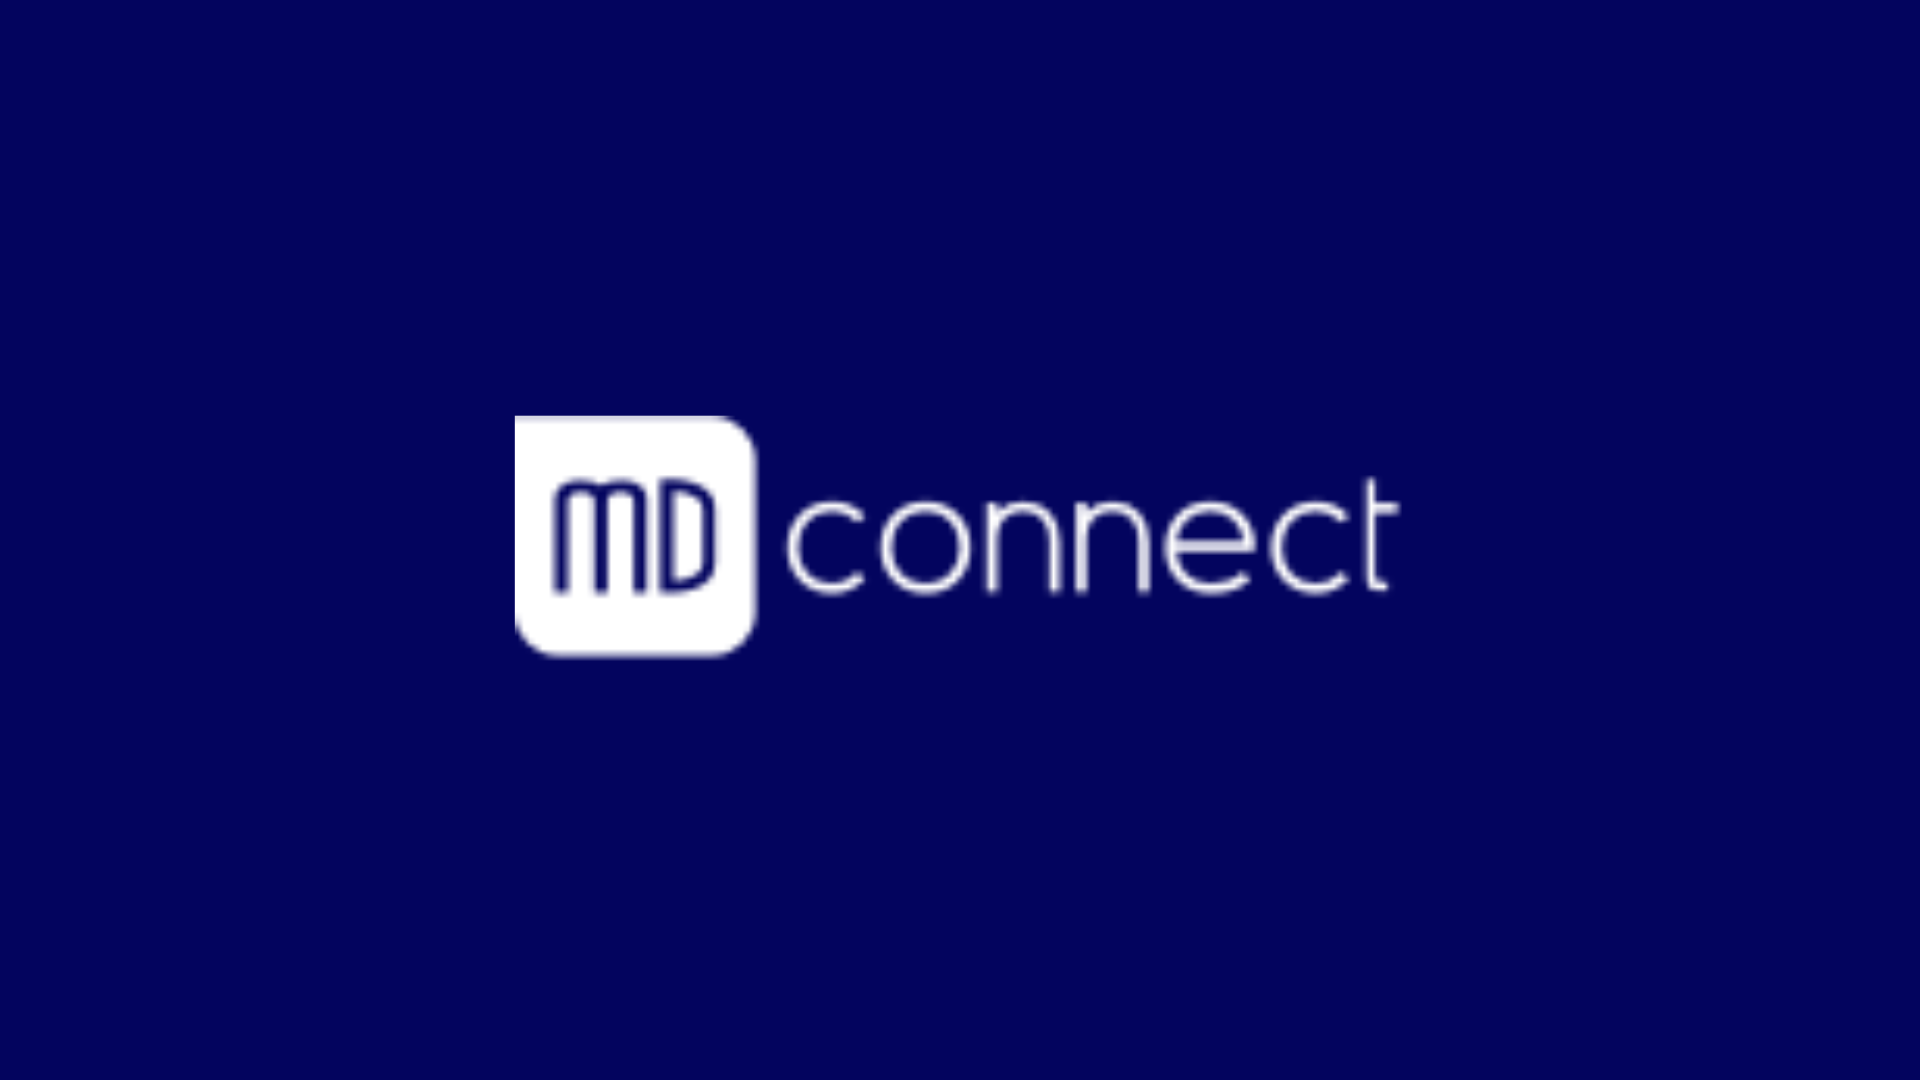 md connect logo